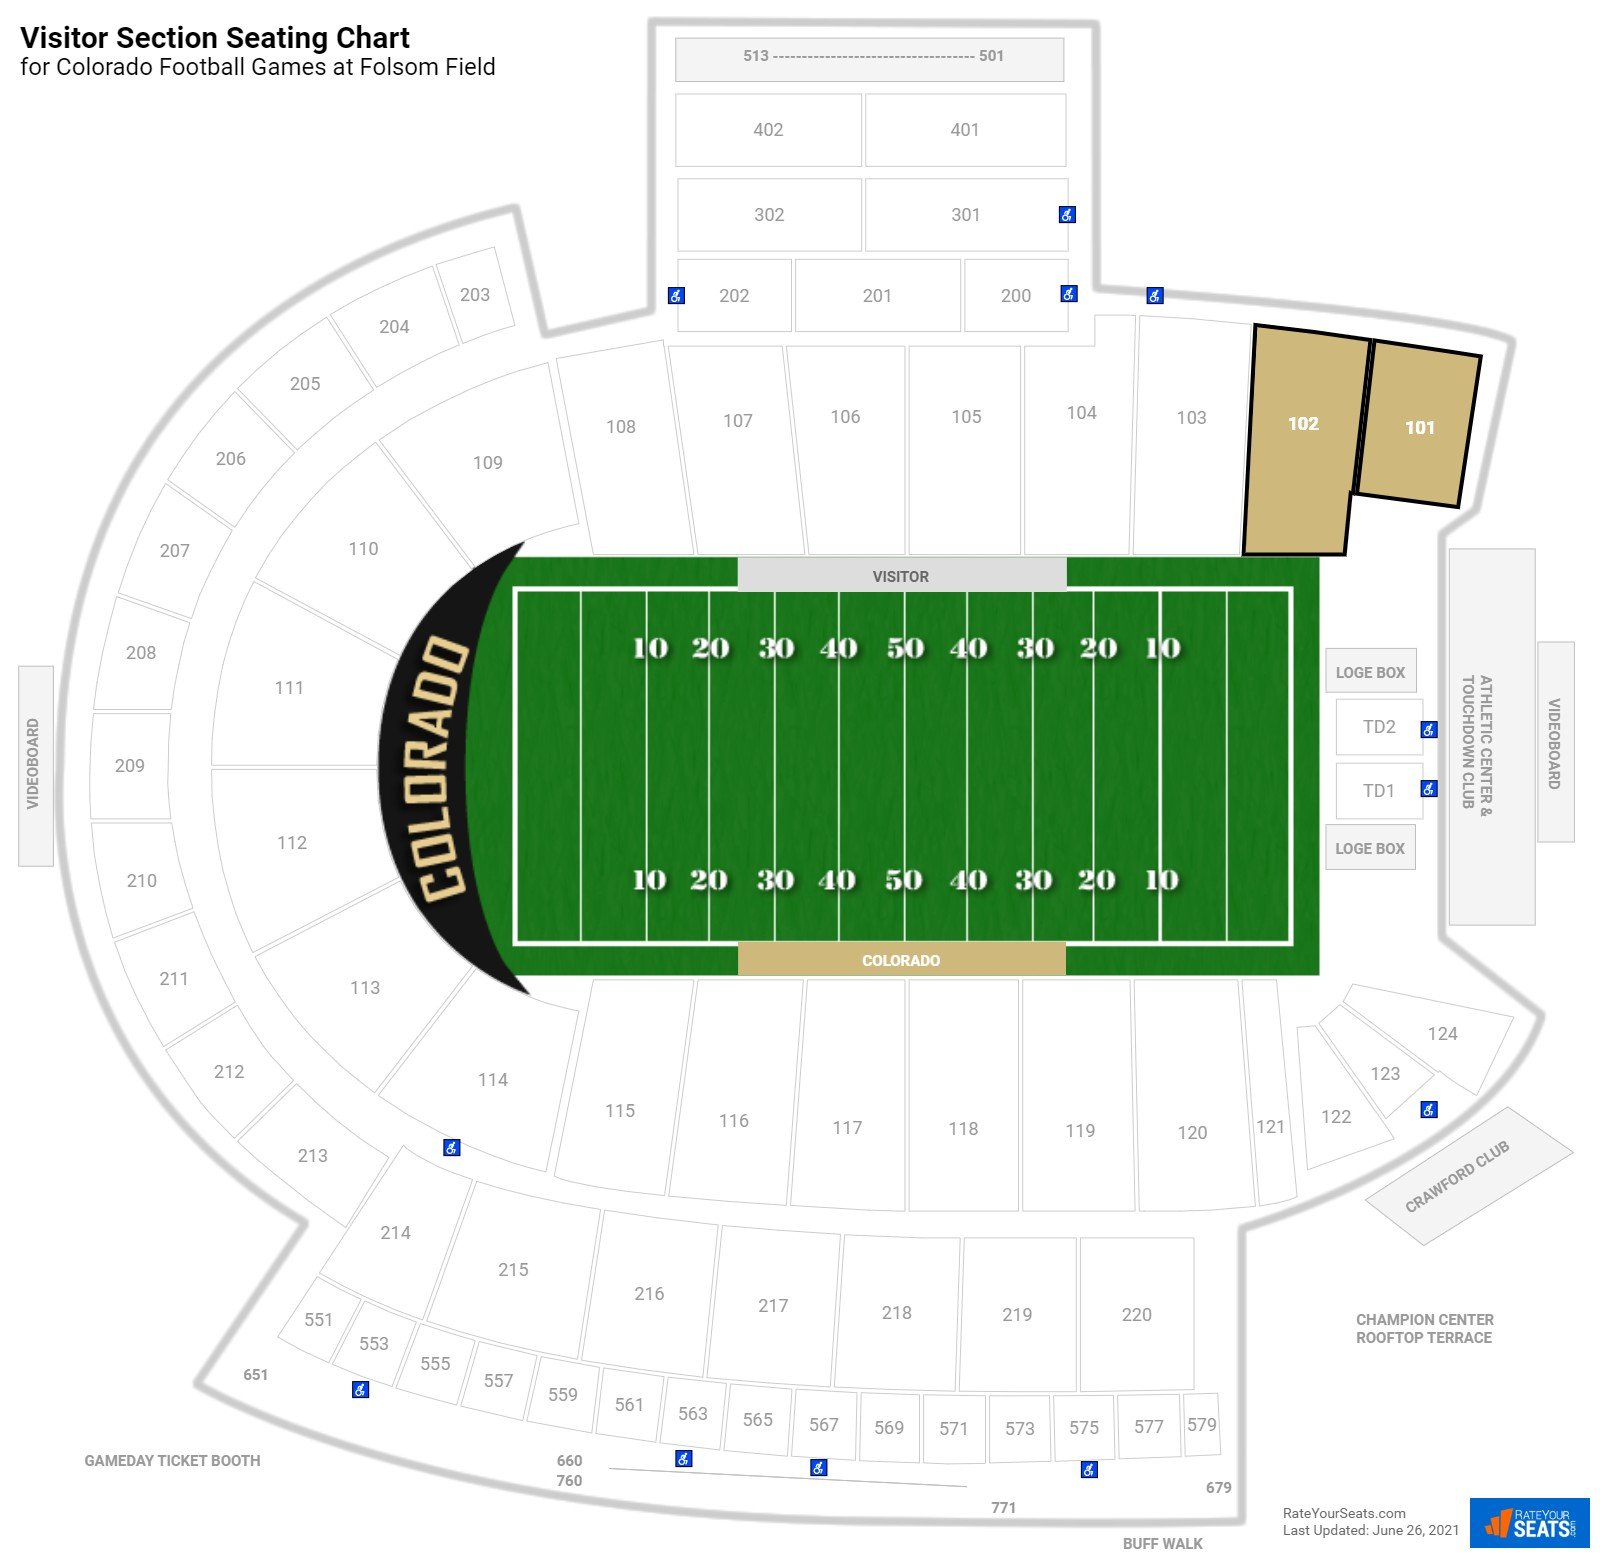 Colorado Visitor Section Seating Chart at Folsom Field